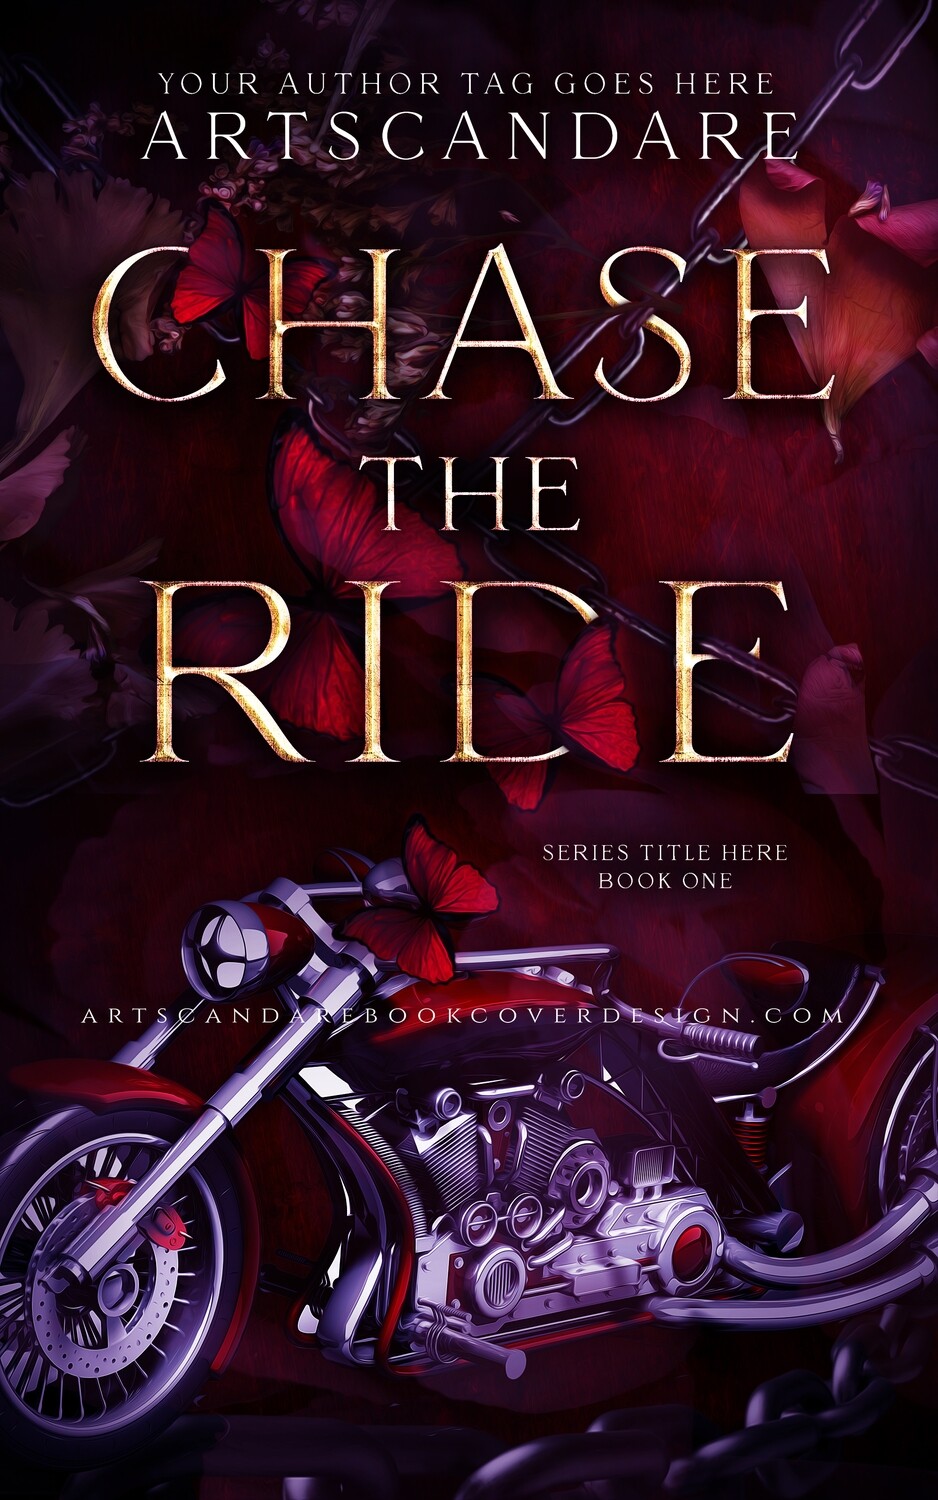 CHASE THE RIDE